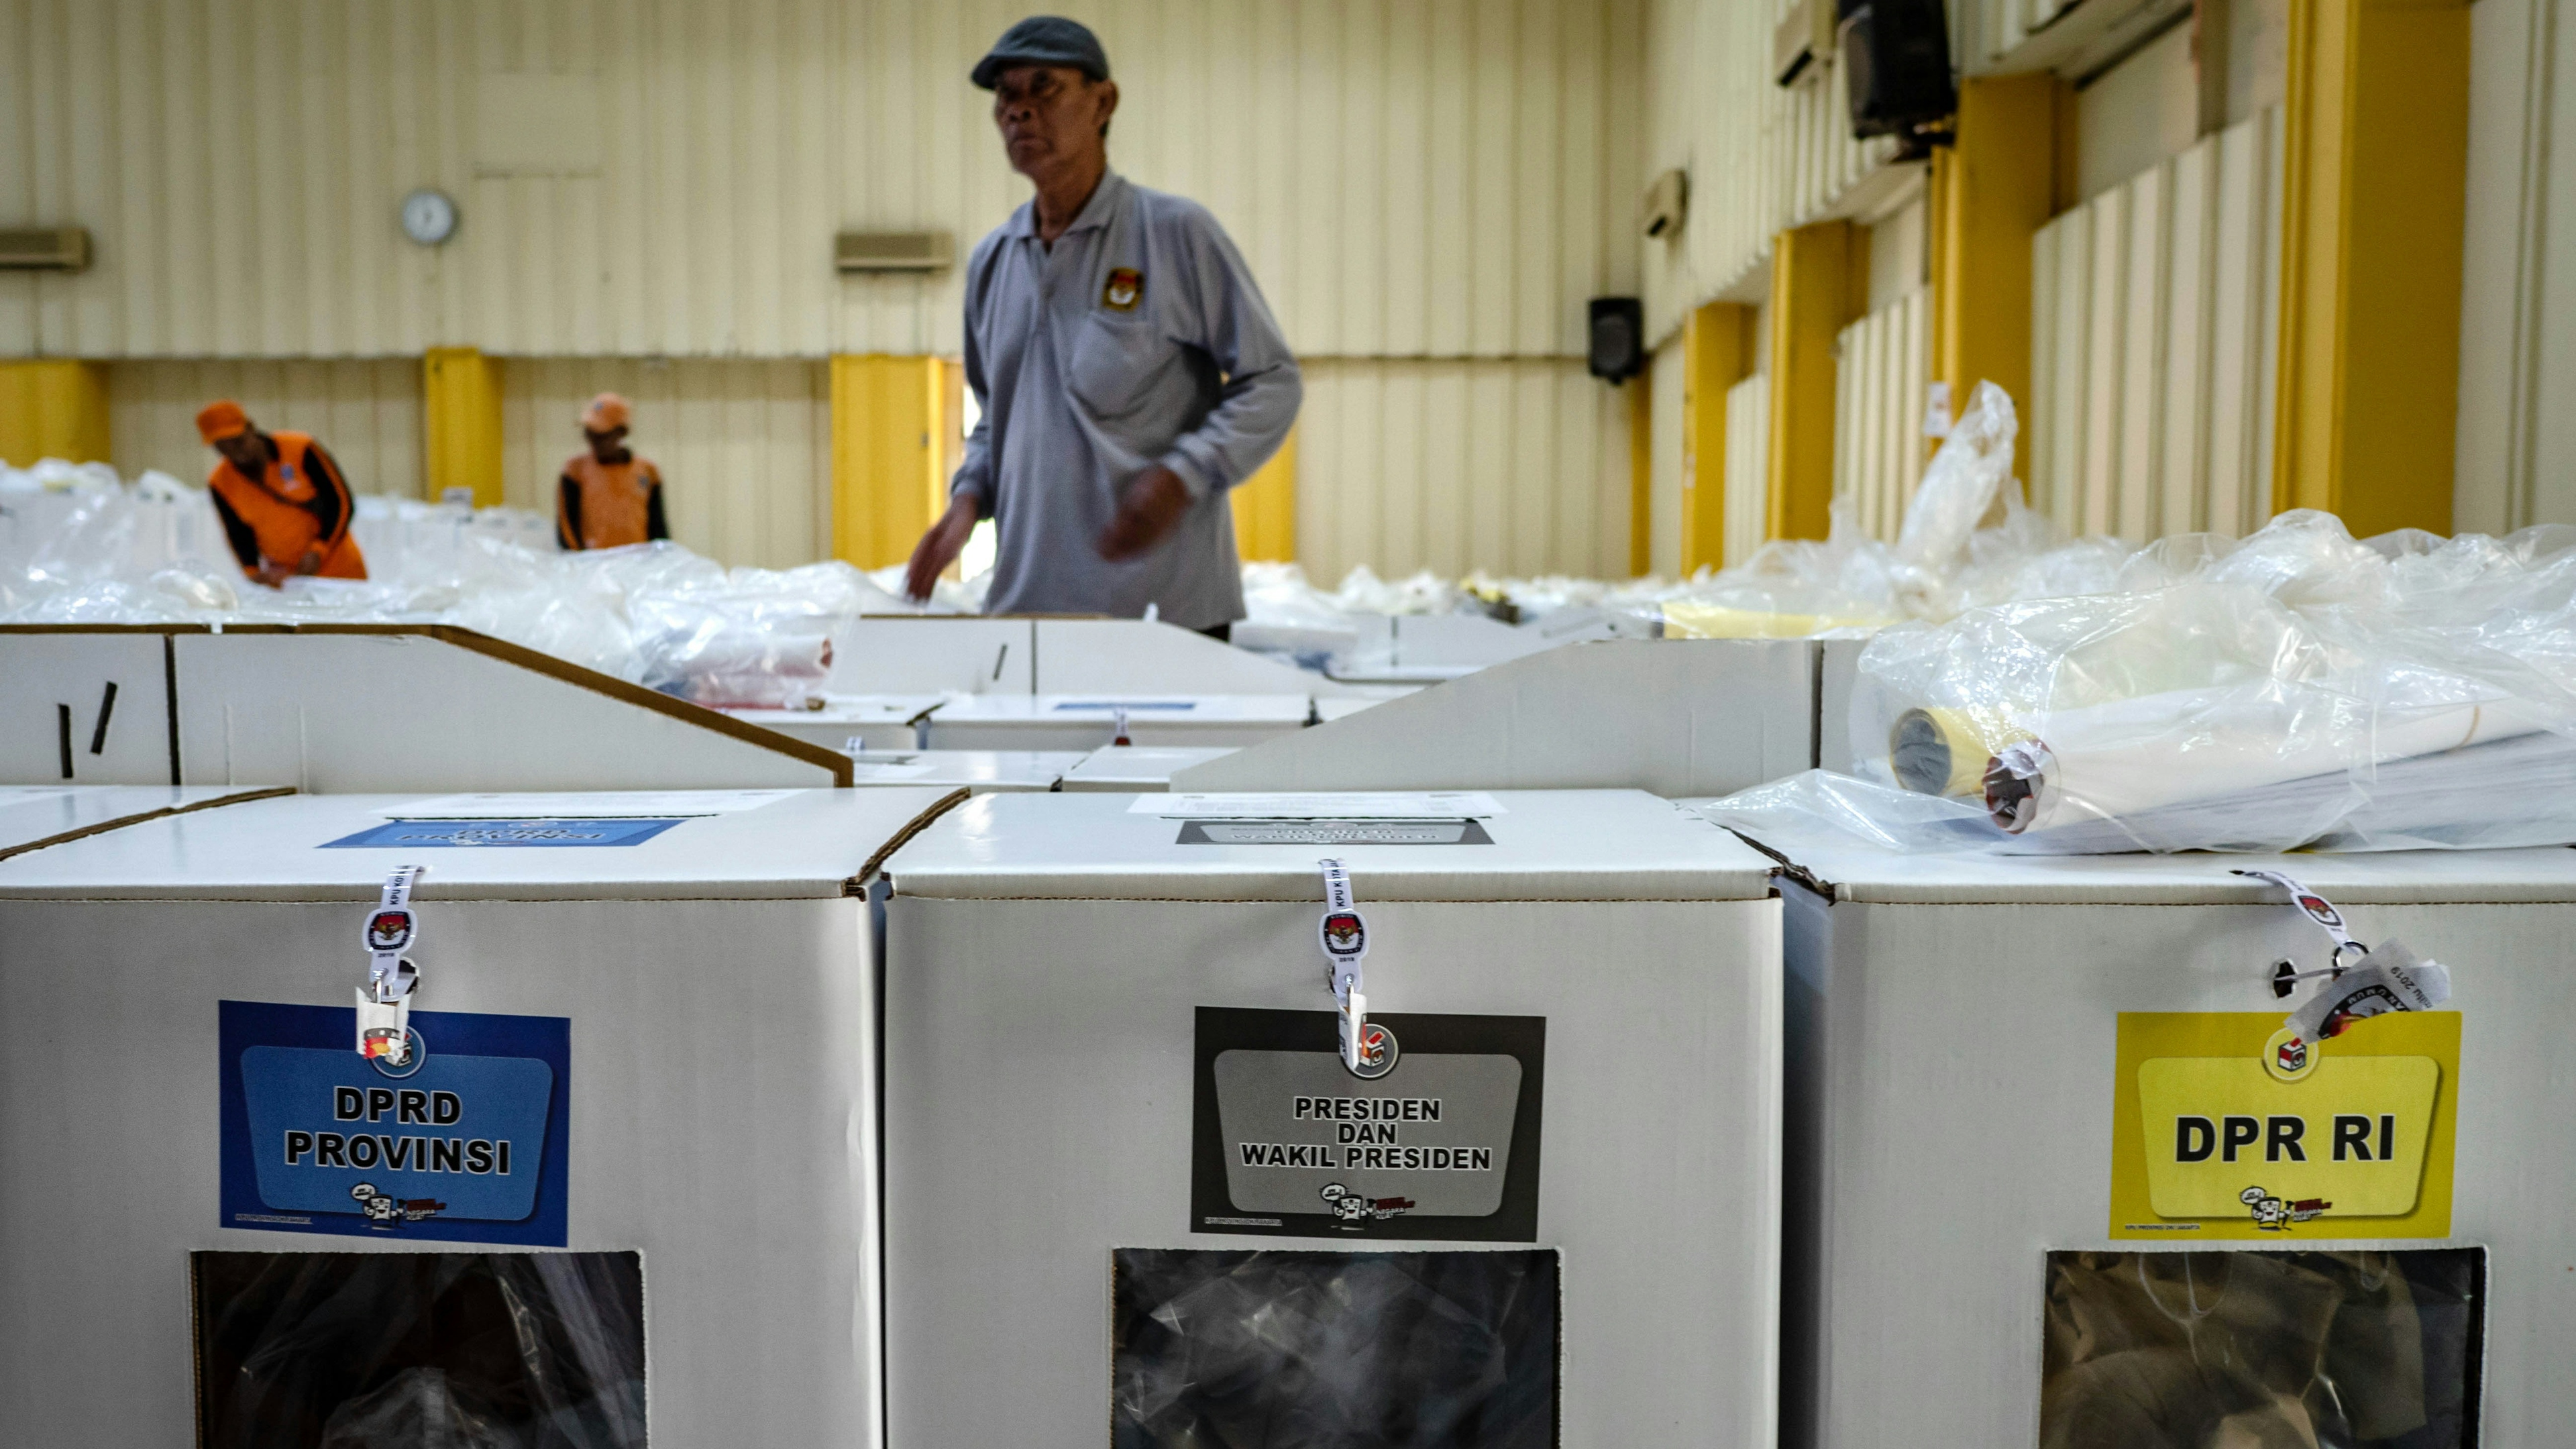 Indonesian elections boxes